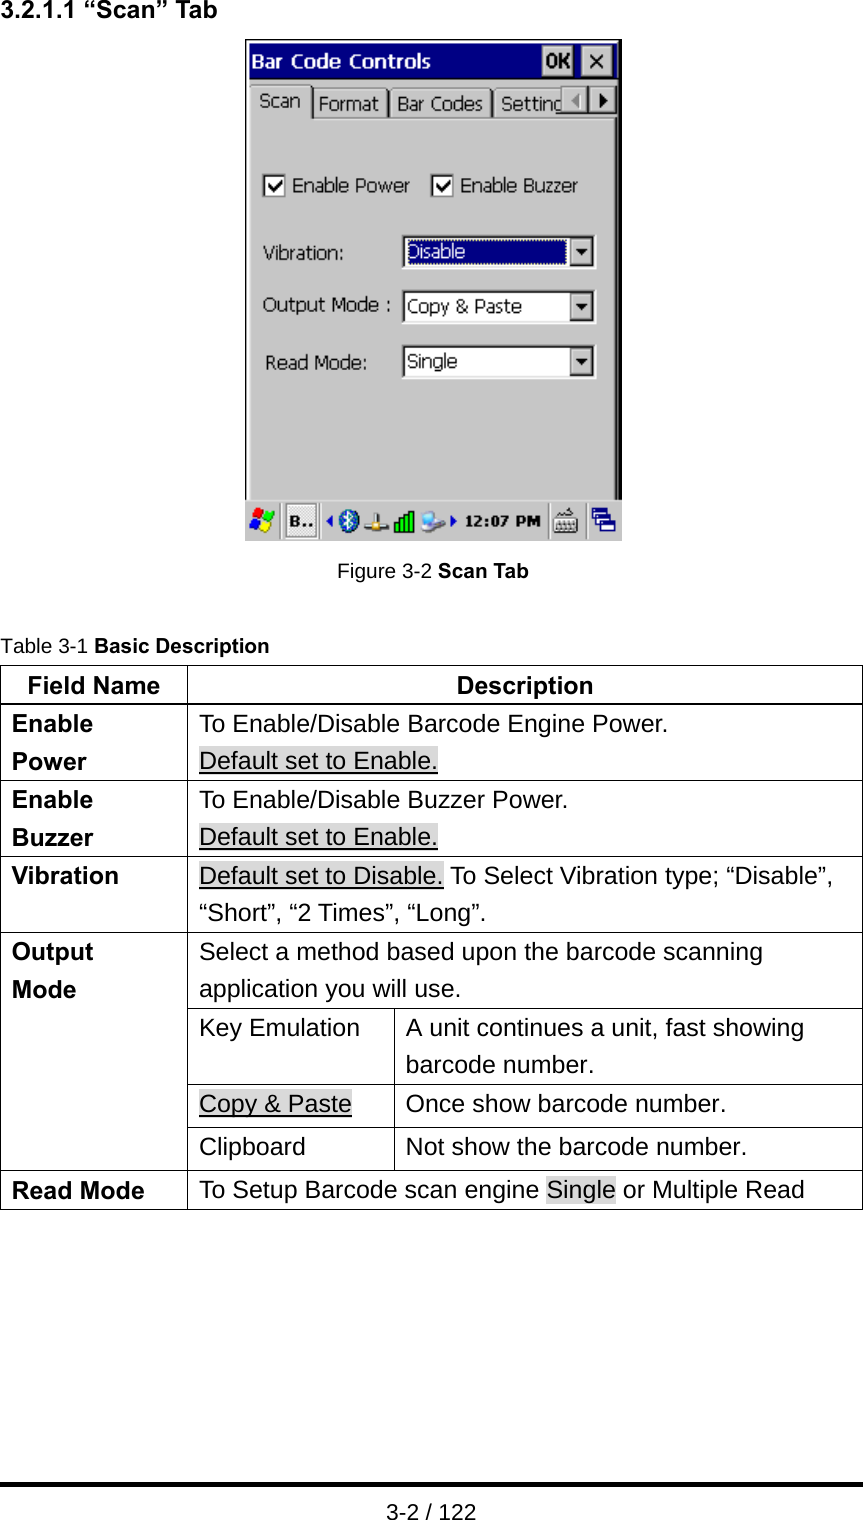  3-2 / 122 3.2.1.1 “Scan” Tab  Figure 3-2 Scan Tab  Table 3-1 Basic Description Field Name  Description Enable Power To Enable/Disable Barcode Engine Power. Default set to Enable. Enable Buzzer To Enable/Disable Buzzer Power.   Default set to Enable. Vibration  Default set to Disable. To Select Vibration type; “Disable”, “Short”, “2 Times”, “Long”.   Select a method based upon the barcode scanning application you will use. Key Emulation  A unit continues a unit, fast showing barcode number. Copy &amp; Paste  Once show barcode number. Output  Mode  Clipboard  Not show the barcode number. Read Mode  To Setup Barcode scan engine Single or Multiple Read   